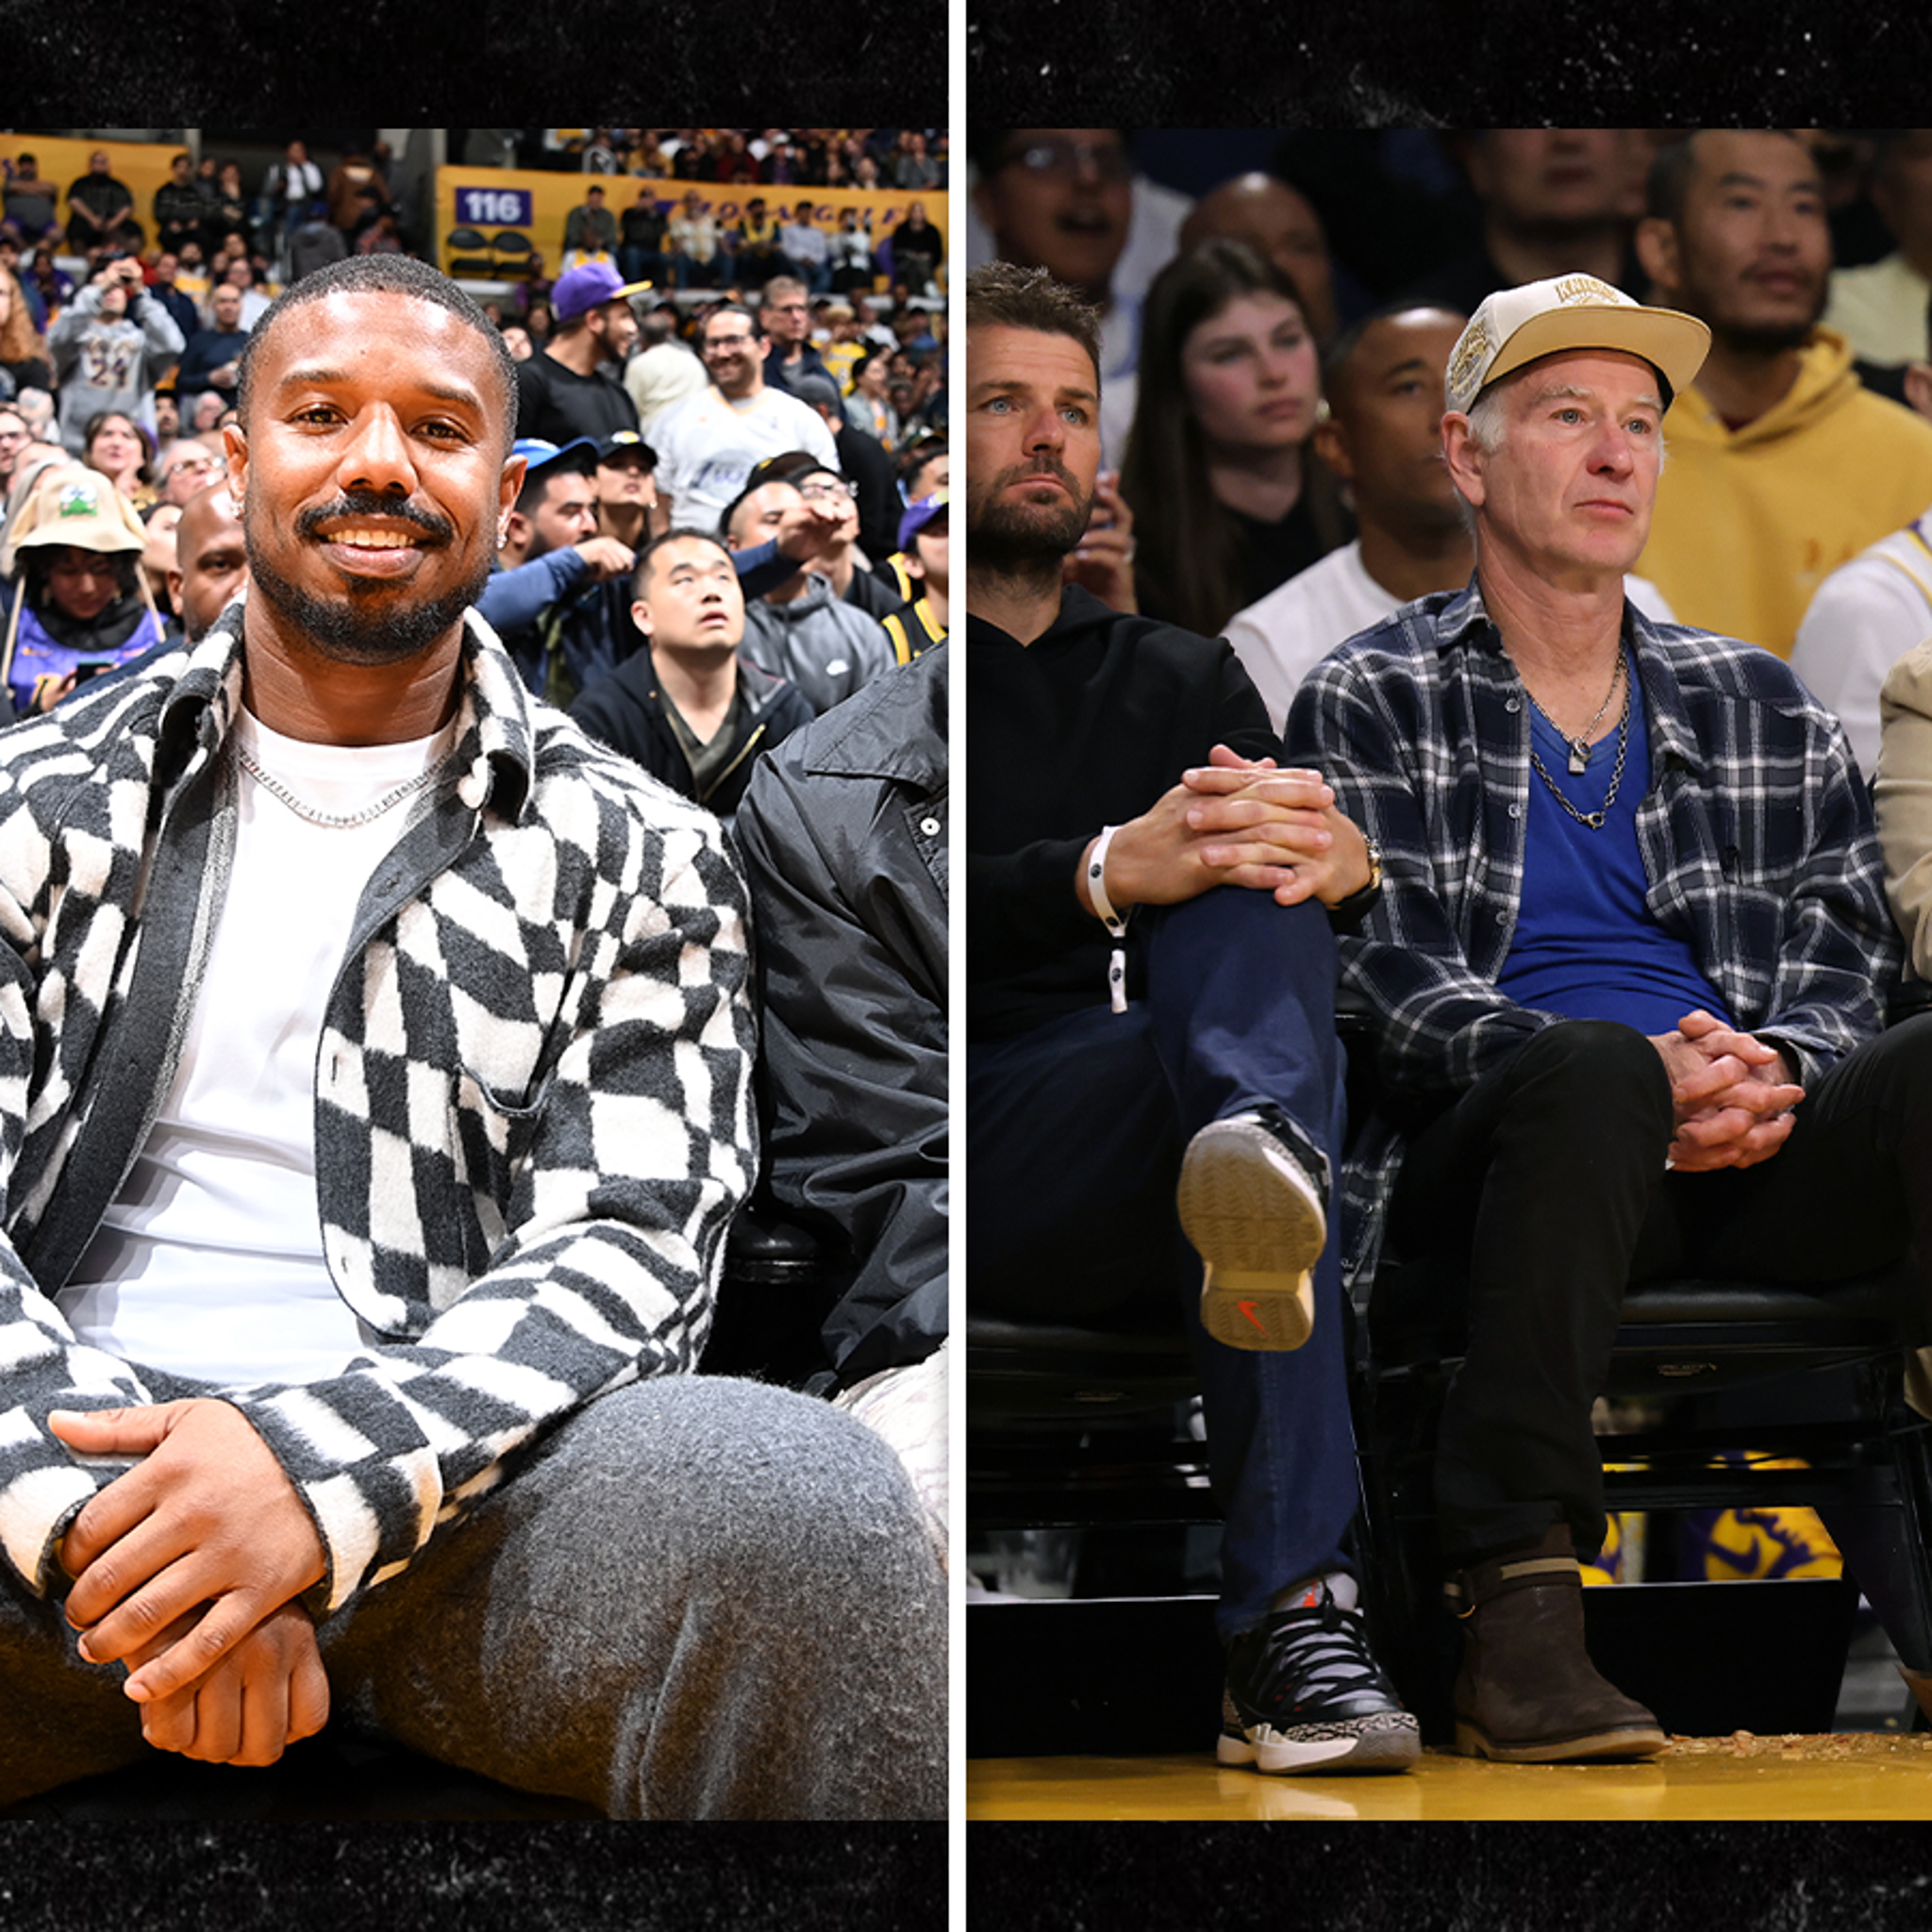 Vintage photos of celebrities courtside at Lakers games